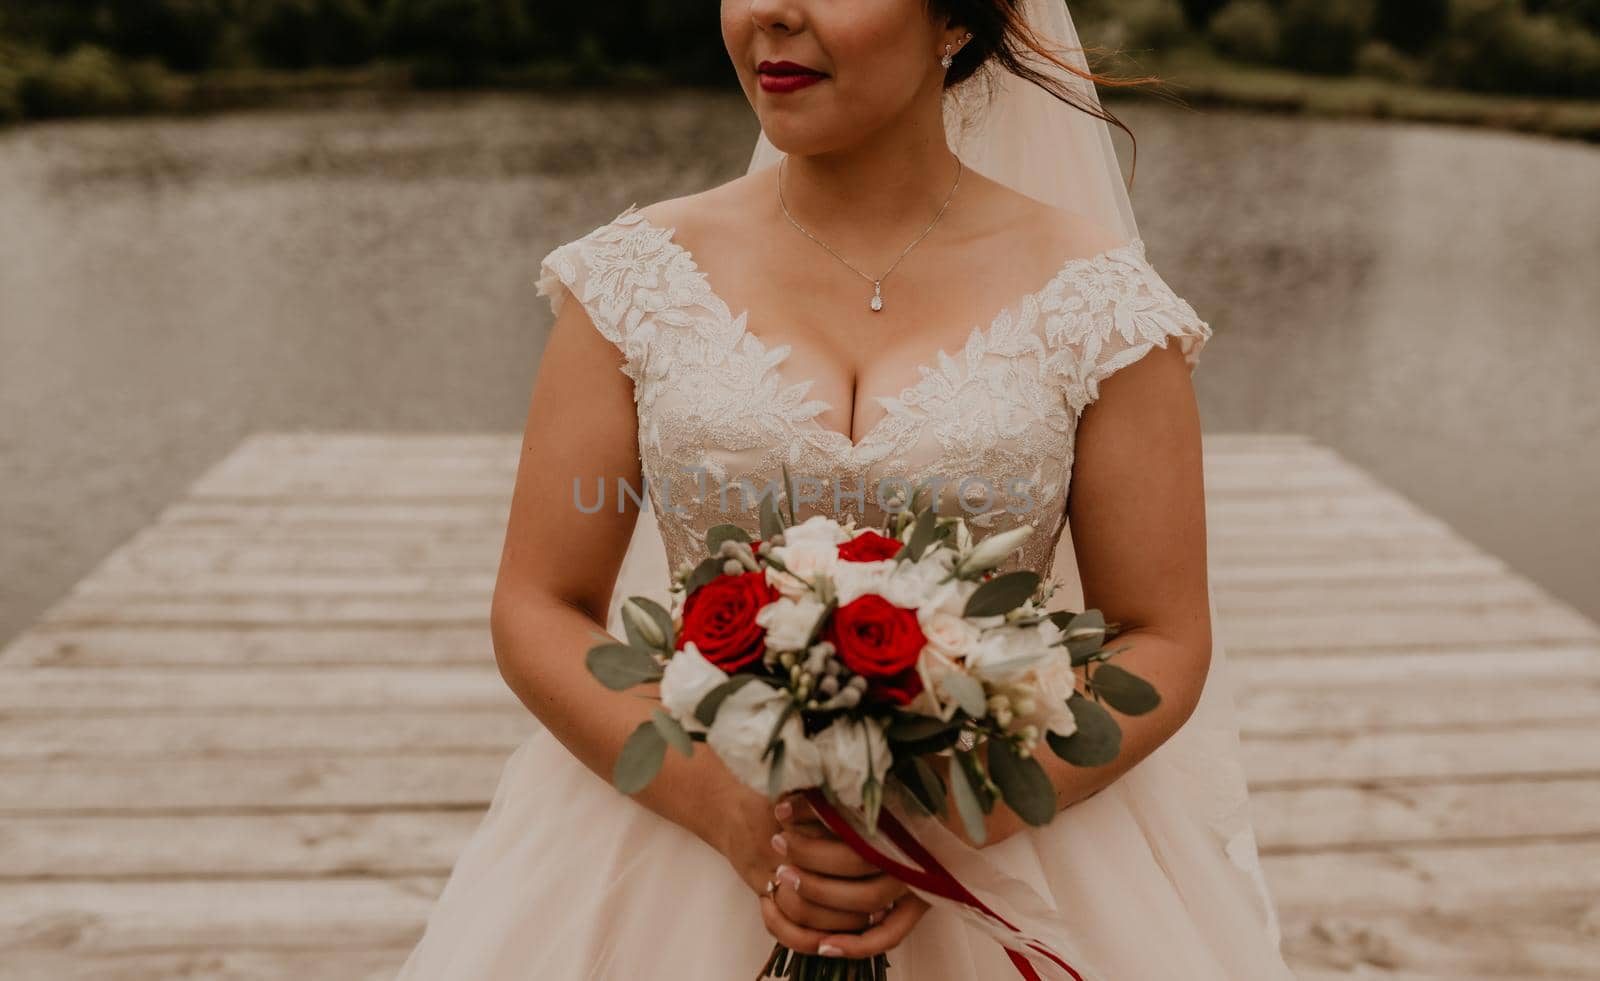 European Caucasian young black-haired woman bride in white wedding dress with long veil and tiara on head. girl holding her bouquet flowers in hands. bride stands on wooden pier on background of river